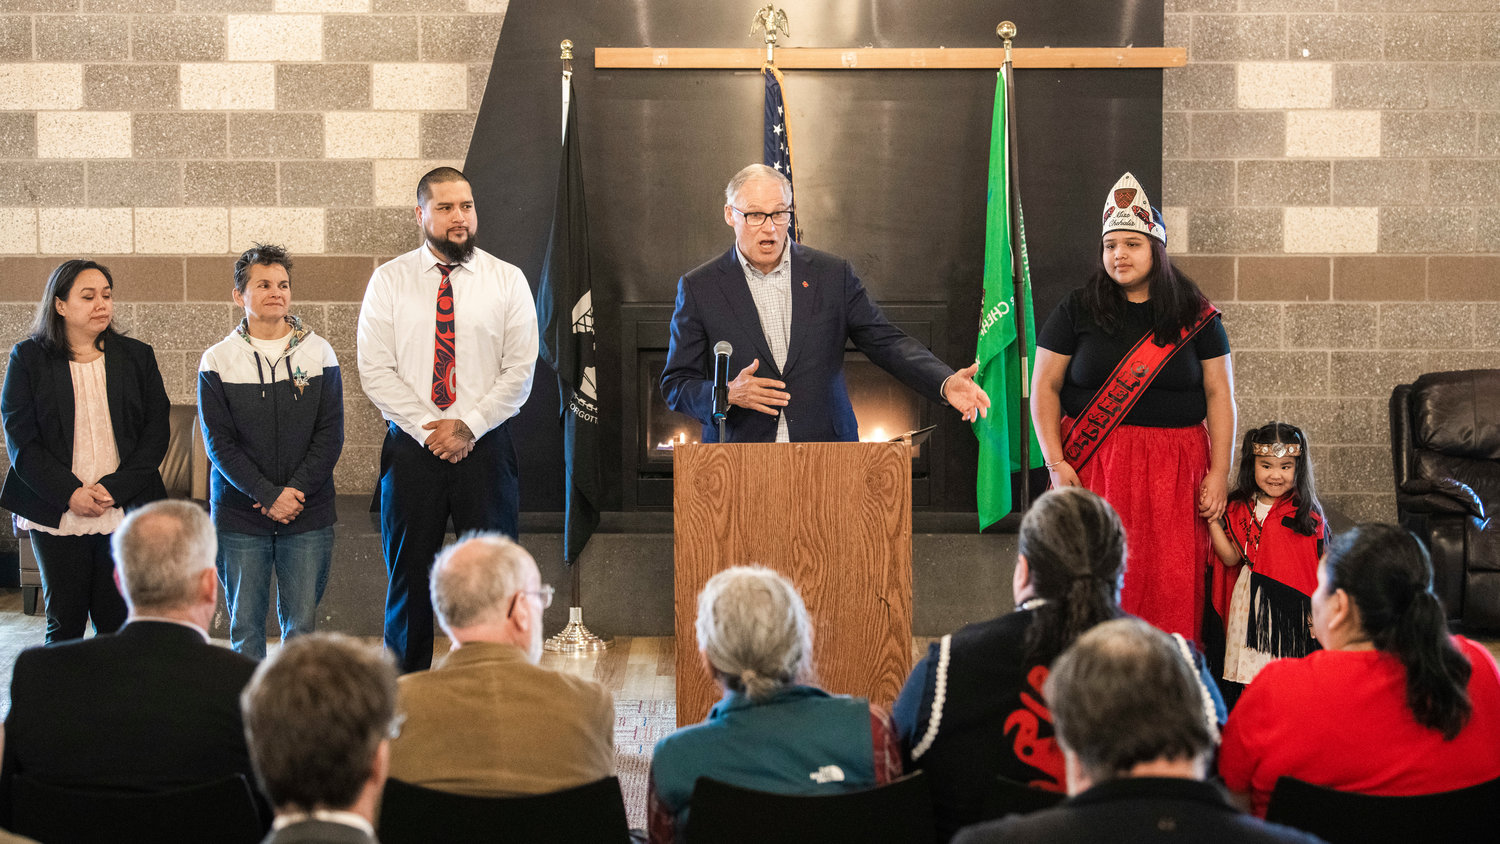 Gov. Jay Inslee talks about the future of Washington state noting the importance of hydrogen power while pointing to 4-year-old Tamika Starr during a meeting at the Chehalis Tribe Community Center Wednesday morning near Oakville.